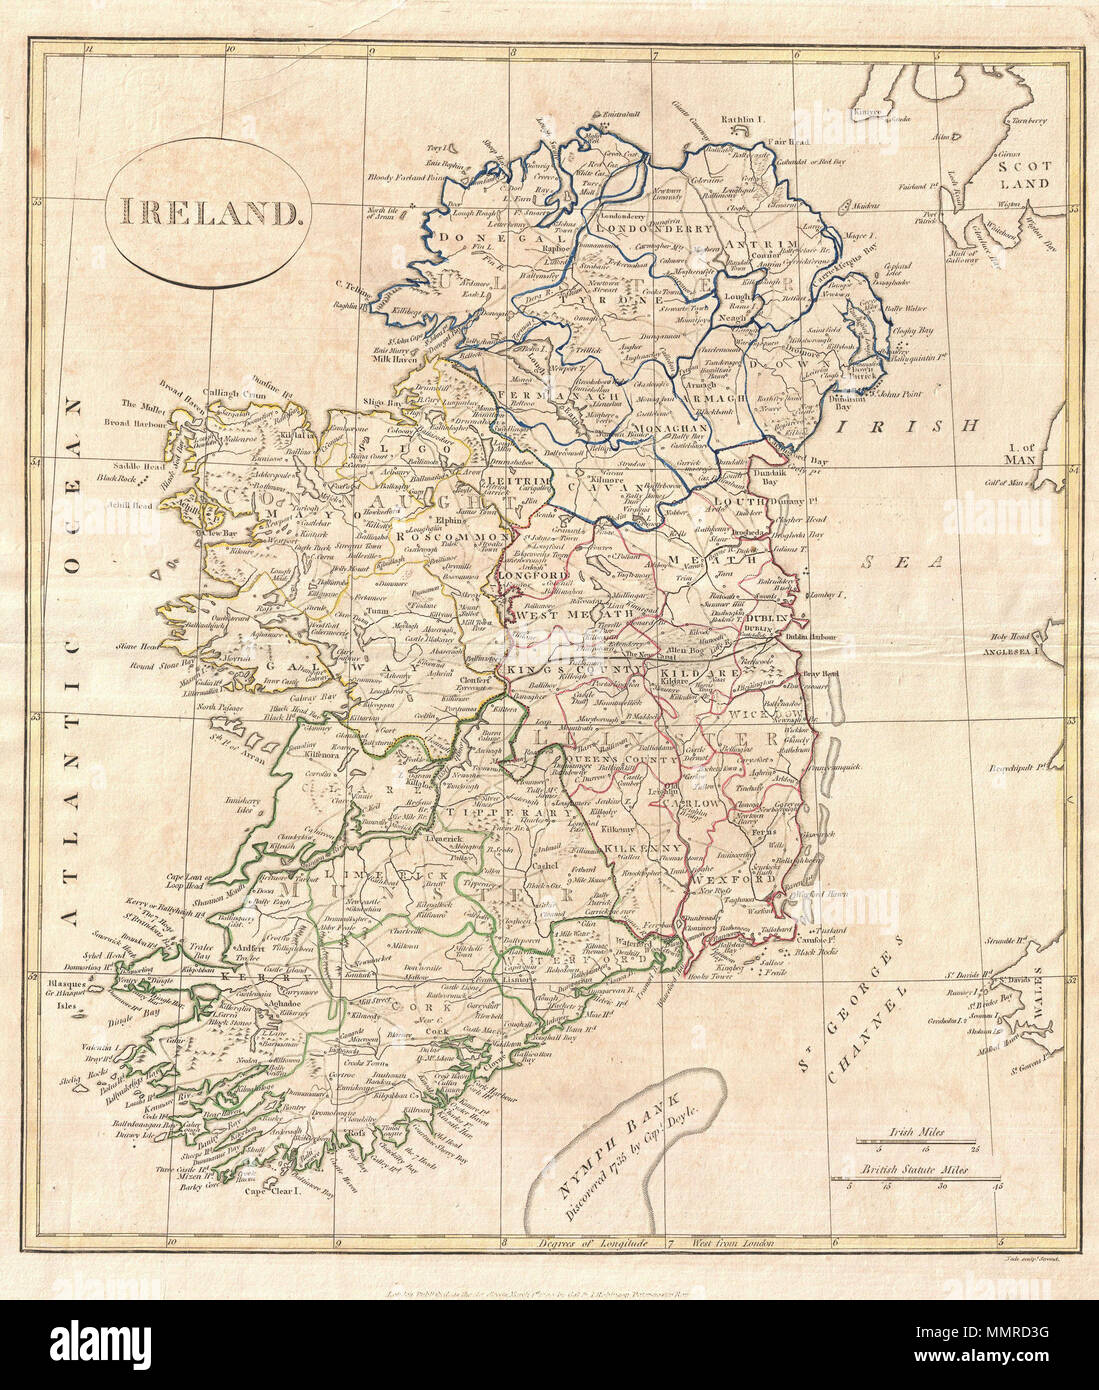 .  English: A fine 1799 map of Ireland by the English map publisher Clement Cruttwell. Map shows Ireland's four provinces, which remain the same to this day. In the north is Ulster, Connaught in the west, Leinster in the east, and Munster in the south. Leinster is comprised of Carlow, Dublin, Kildare, Kilkenny, Laois, Longford, Louth, Meath, Offaly, Westmeath, Wexford and Wicklow. Munster is made up of Clare, Cork, Kerry, Limerick, Tipperary and Waterford. In Connaught are Galway, Leitrim, Mayo, Roscommon and Sligo. Antrim, Armagh, Down, Fermanagh, Londonderry, Tyrone, Cavan, Donegal, and Mona Stock Photo